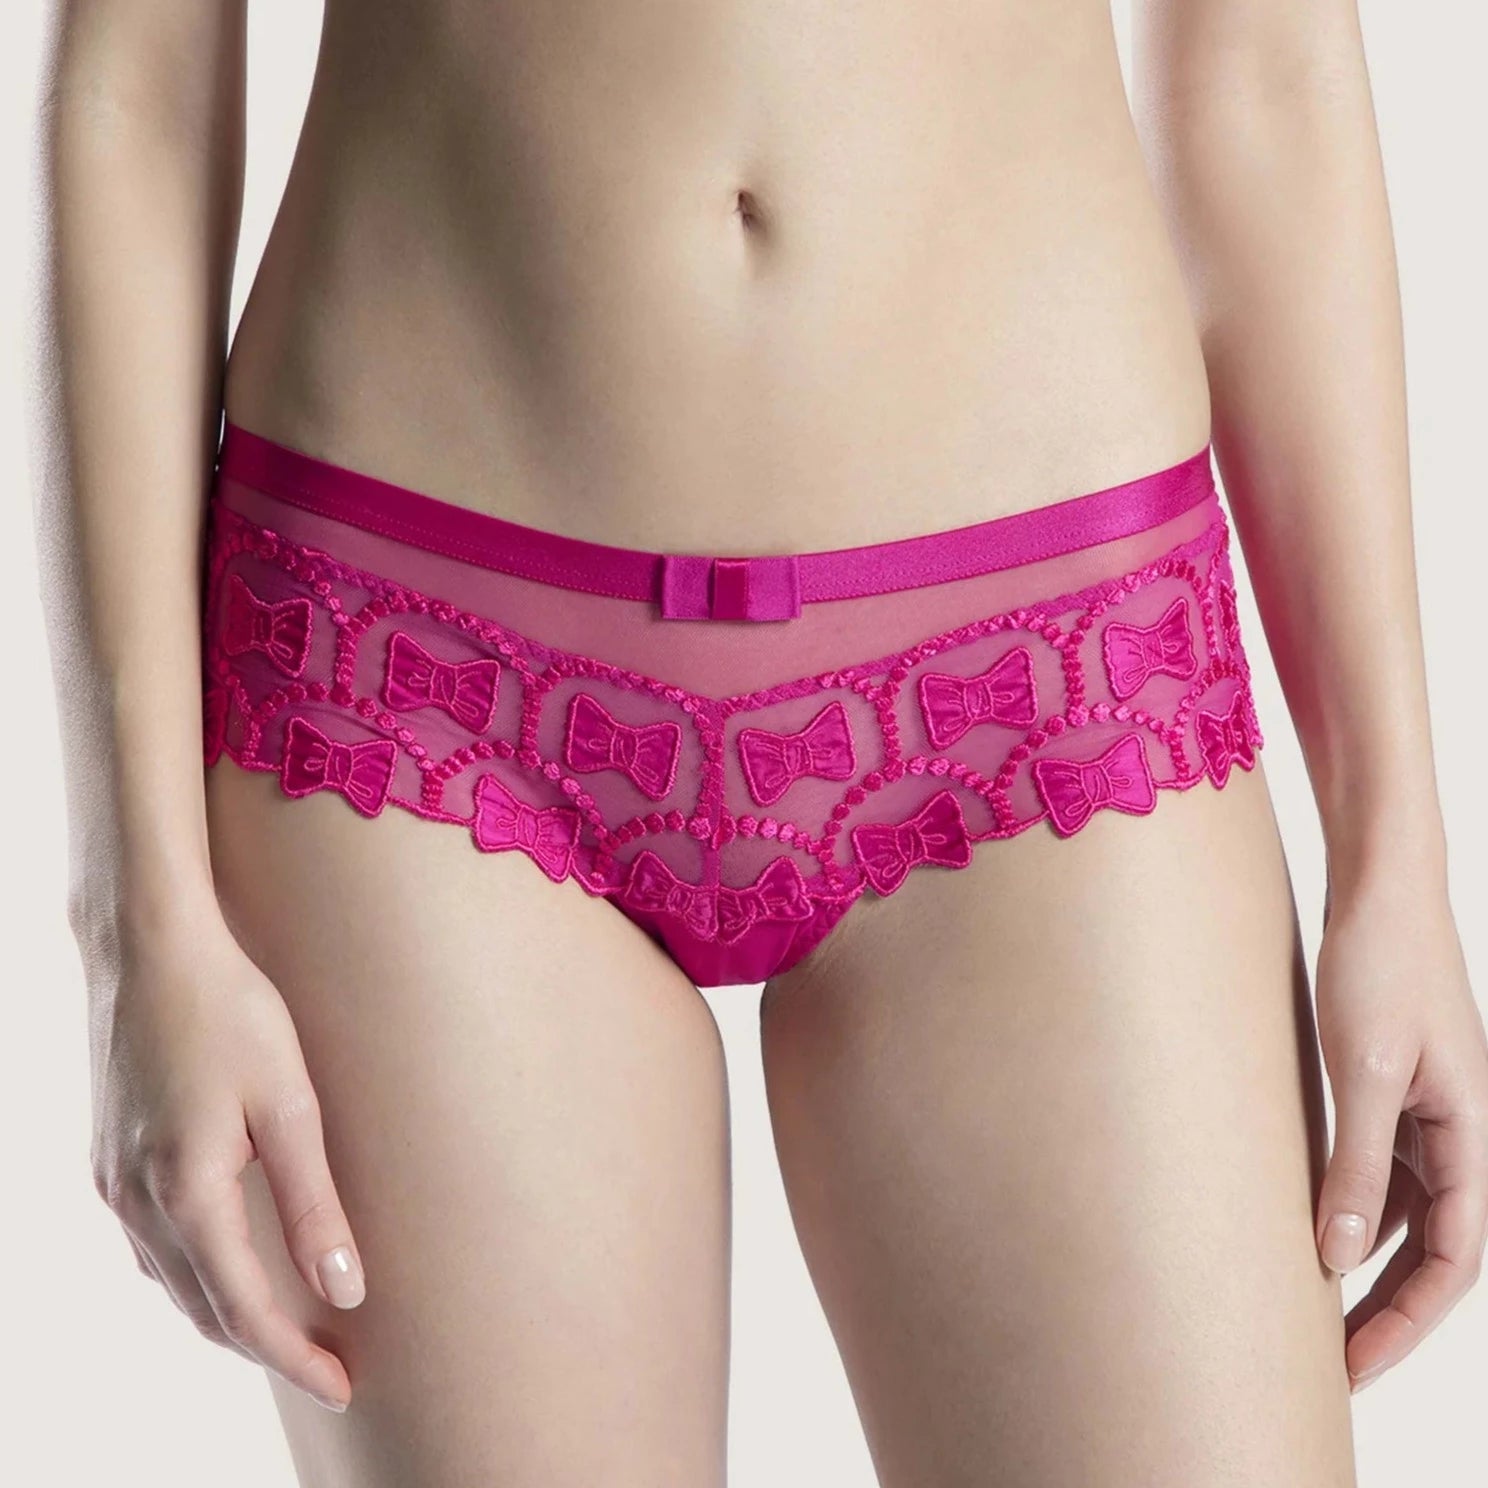 Aubade, VIKTOR&ROLF THE BOW COLLECTION SHORTY | PINK - Bellizima